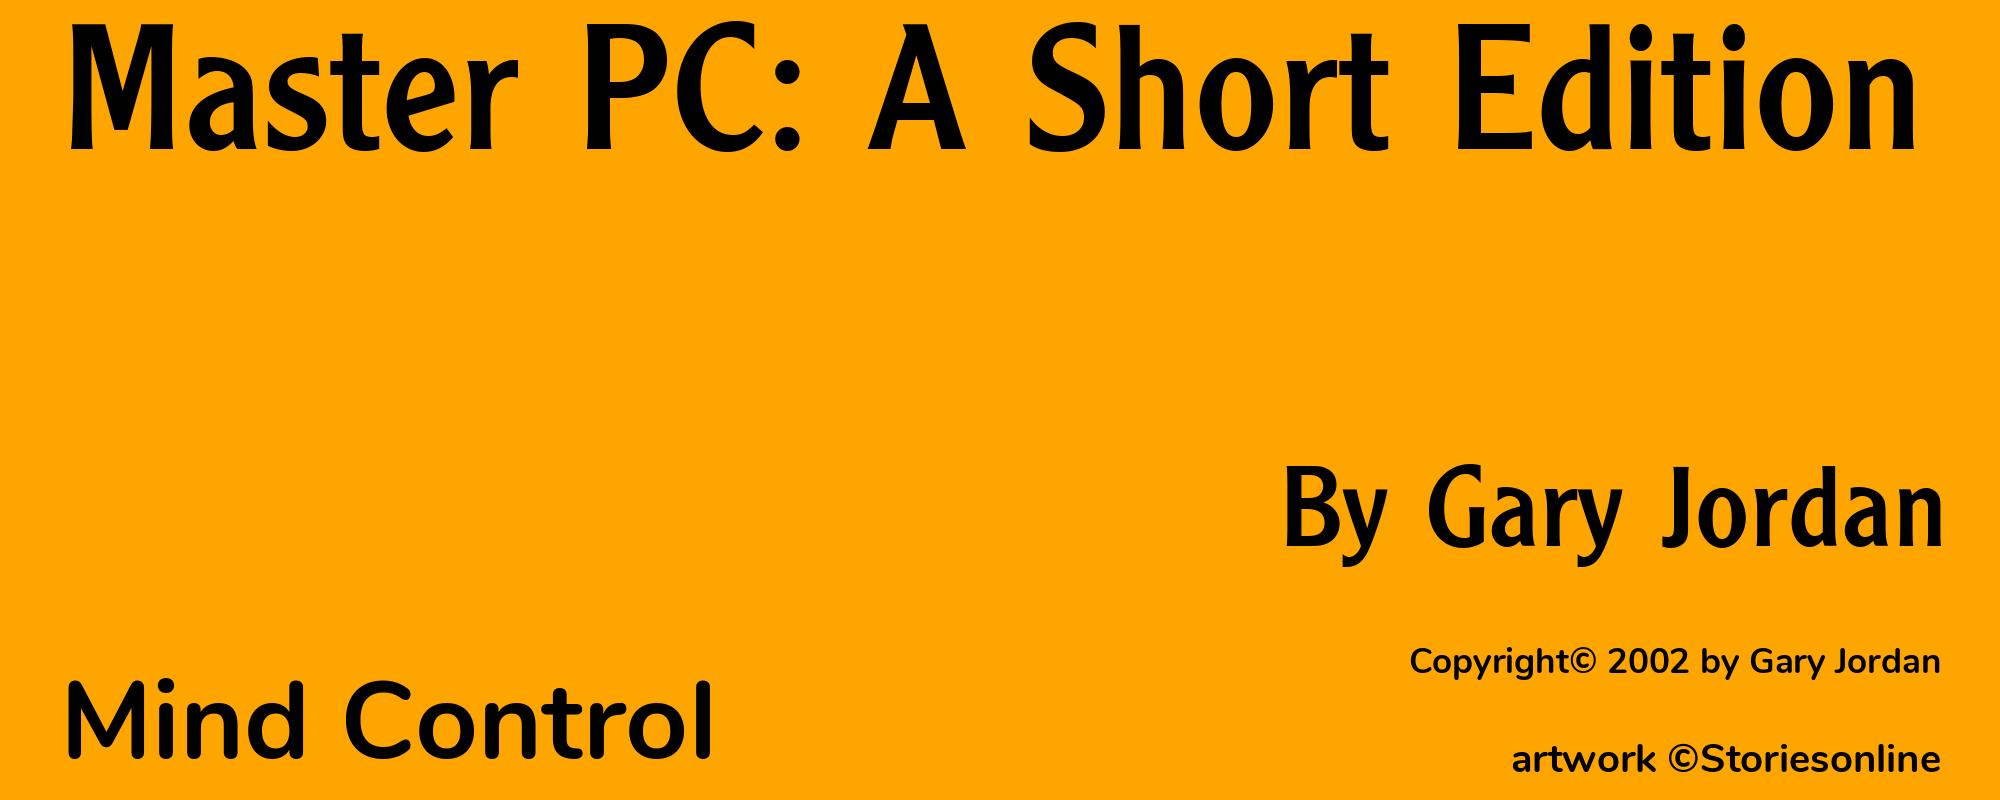 Master PC: A Short Edition - Cover